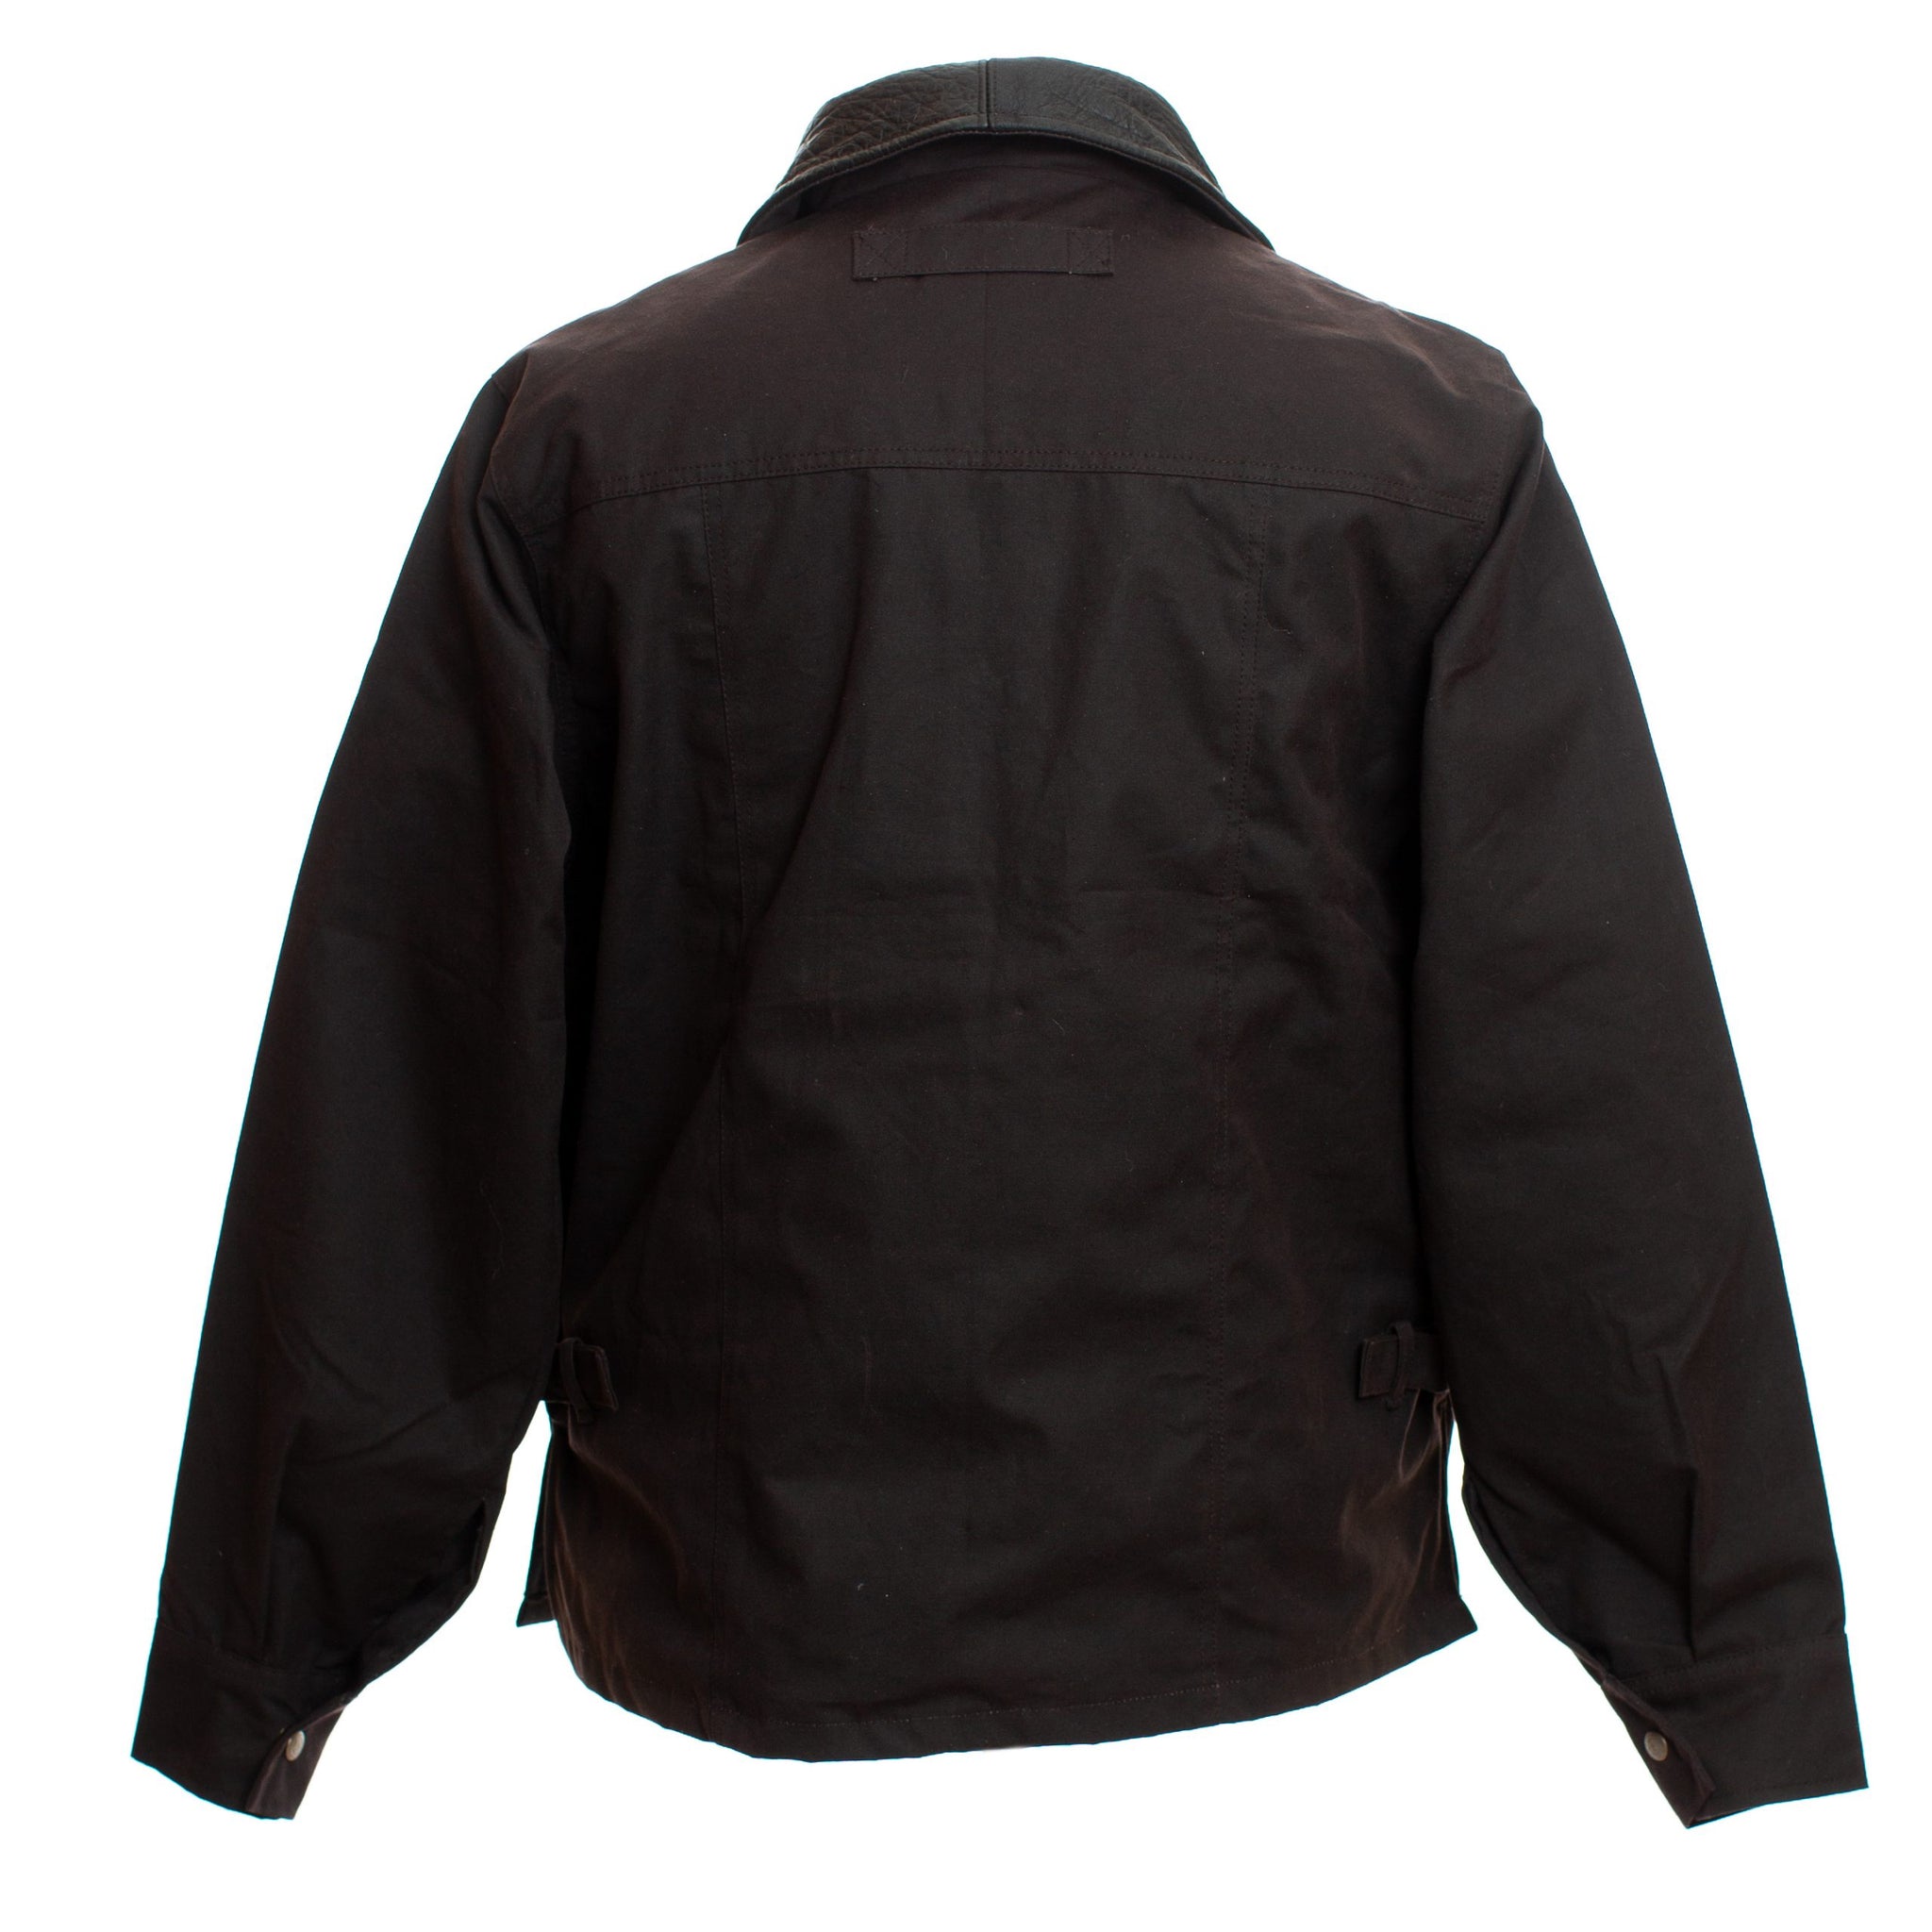 Chisum Concealed Carry Canvas Jacket - Wyoming Traders